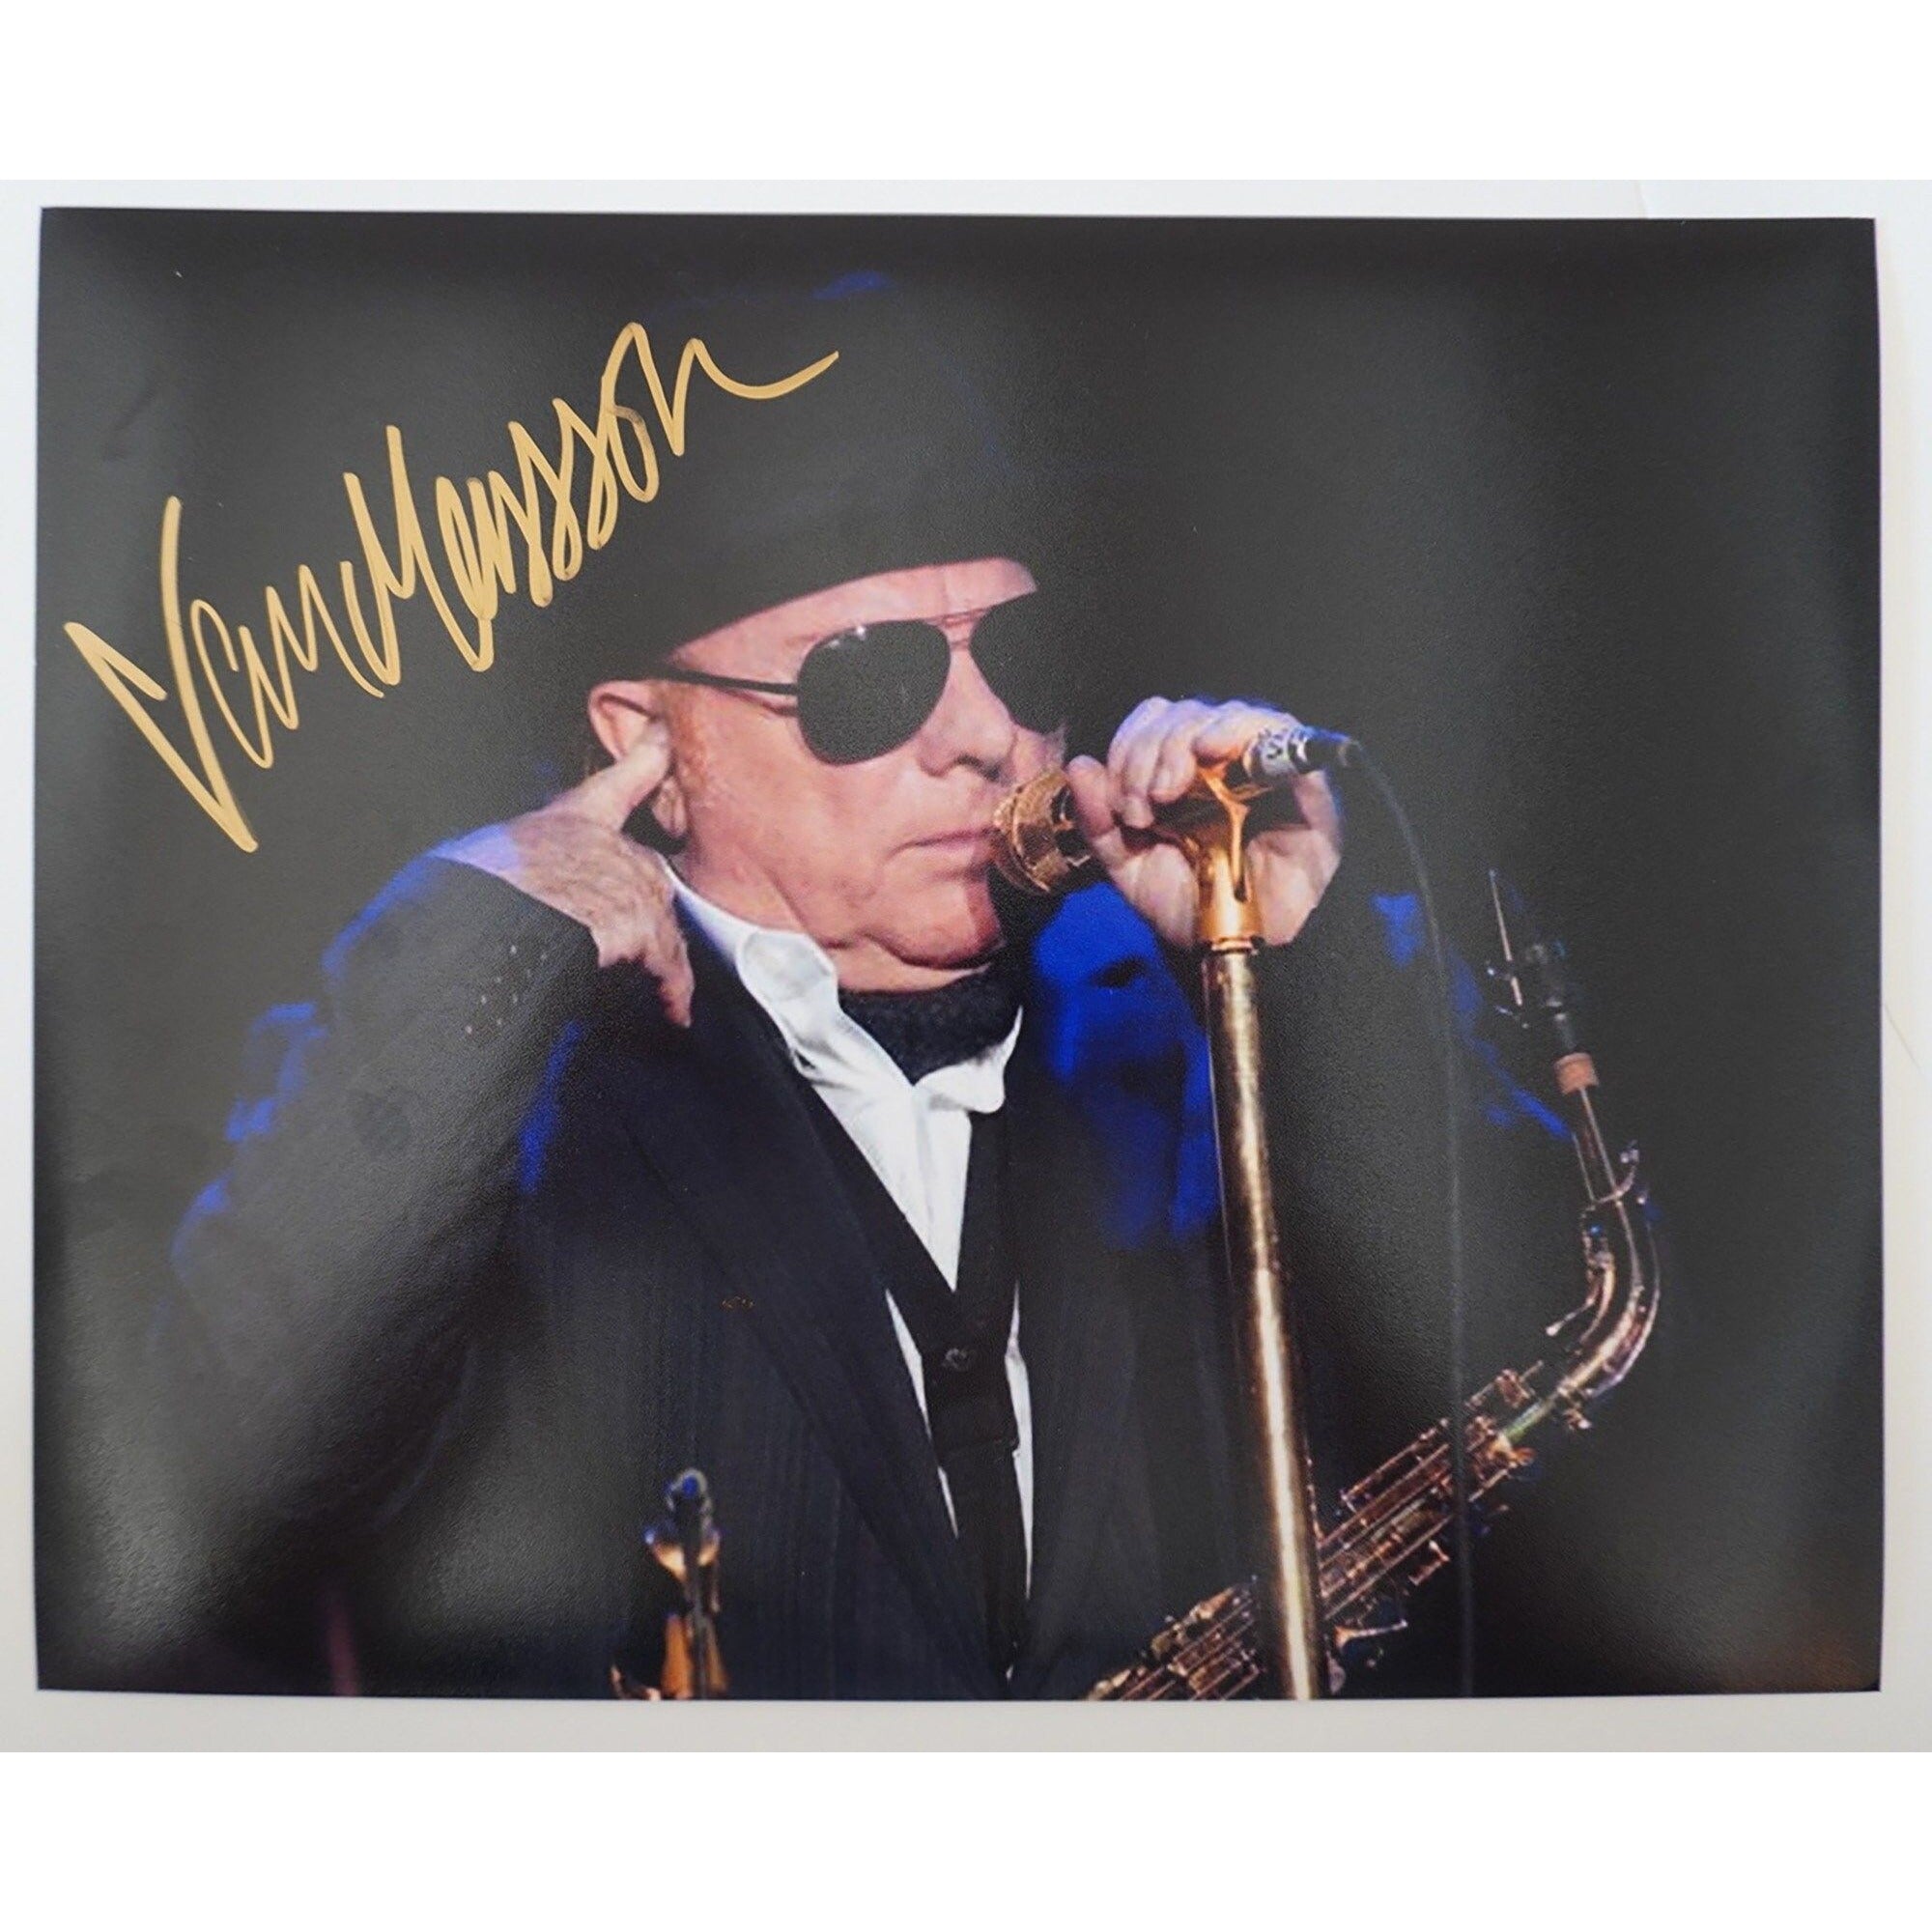 Van Morrison 8 by 10 signed photo with proof